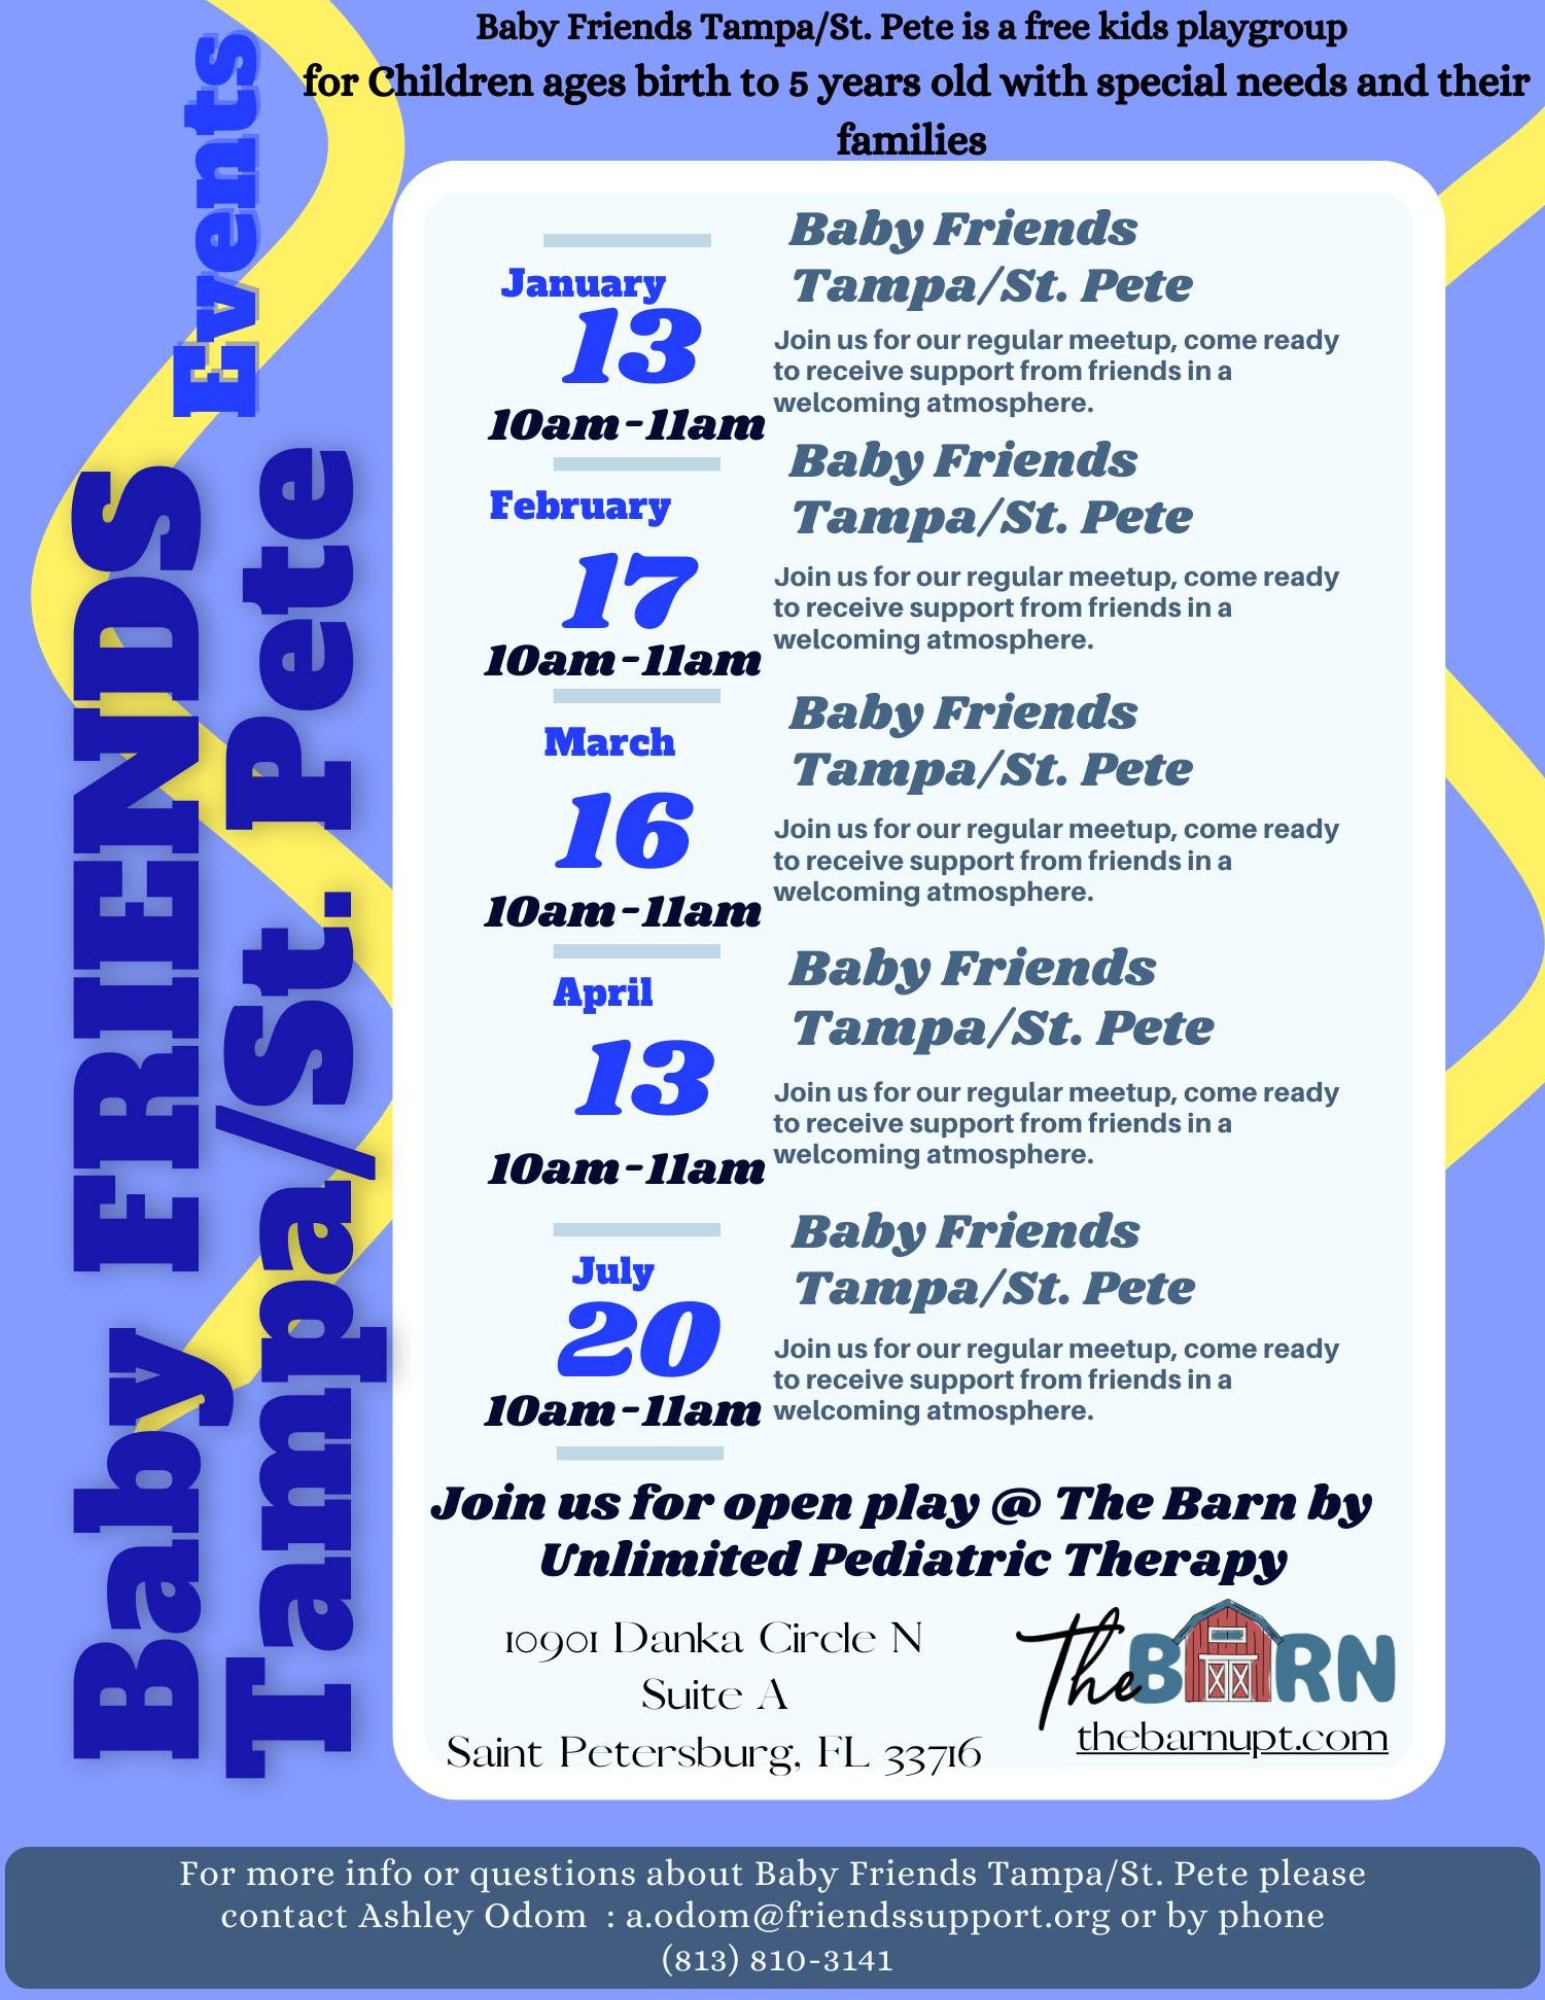 Join the Baby Friends playgroup, a no-cost gathering for children aged birth to 5 years with special needs and their families. Be prepared to receive support from friends in a welcoming atmosphere.